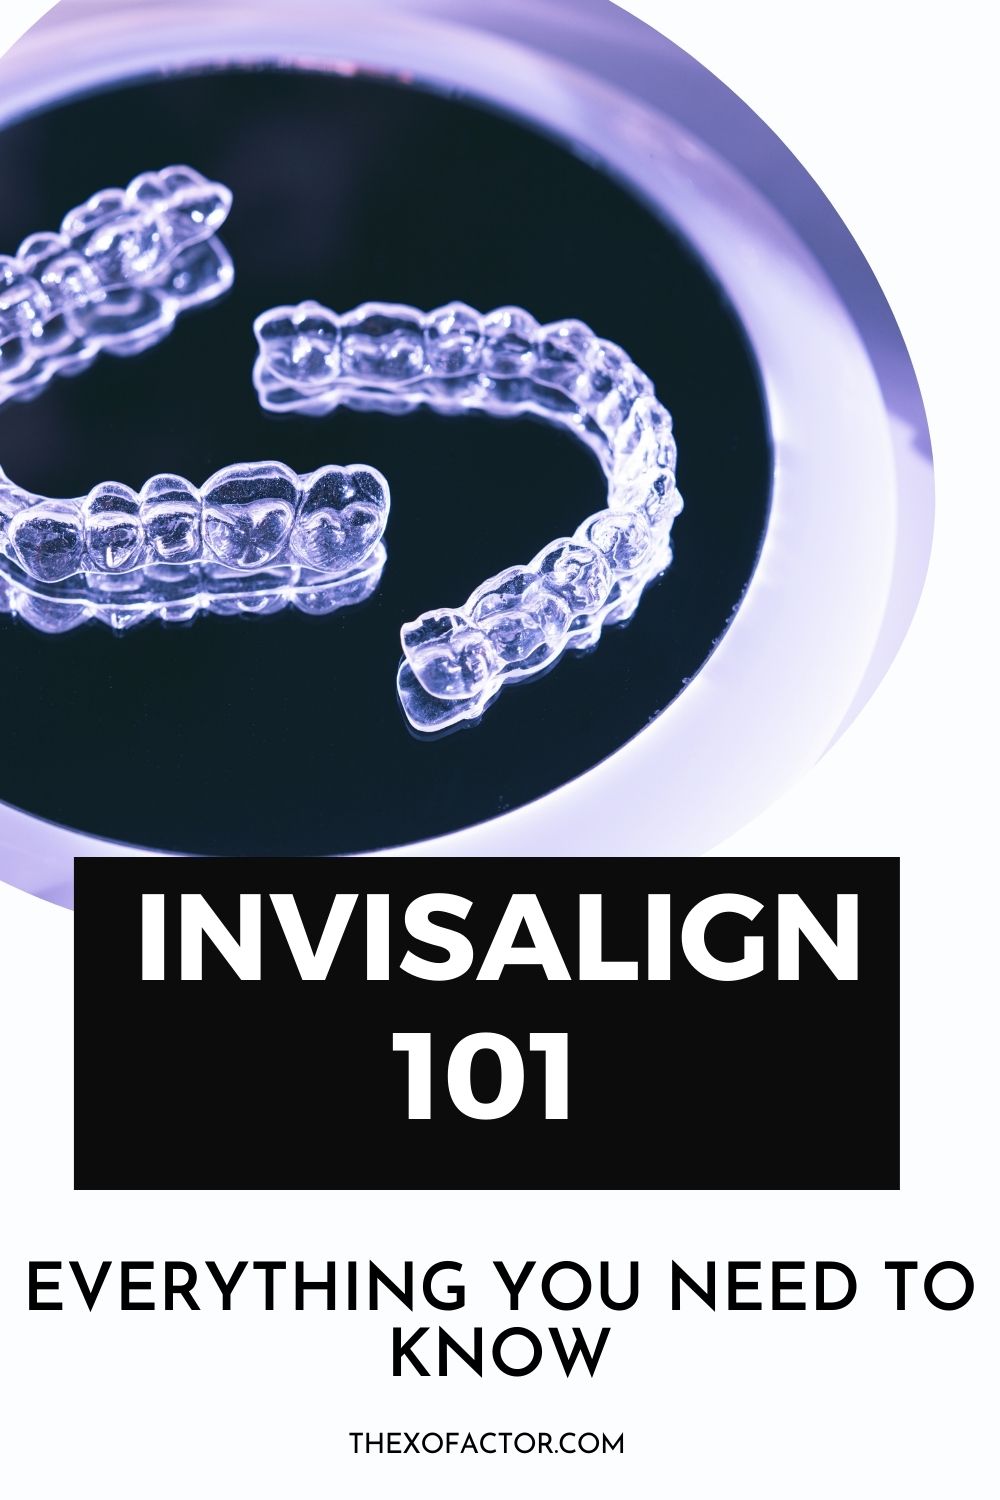 Invisalign 101: Everything you need to know